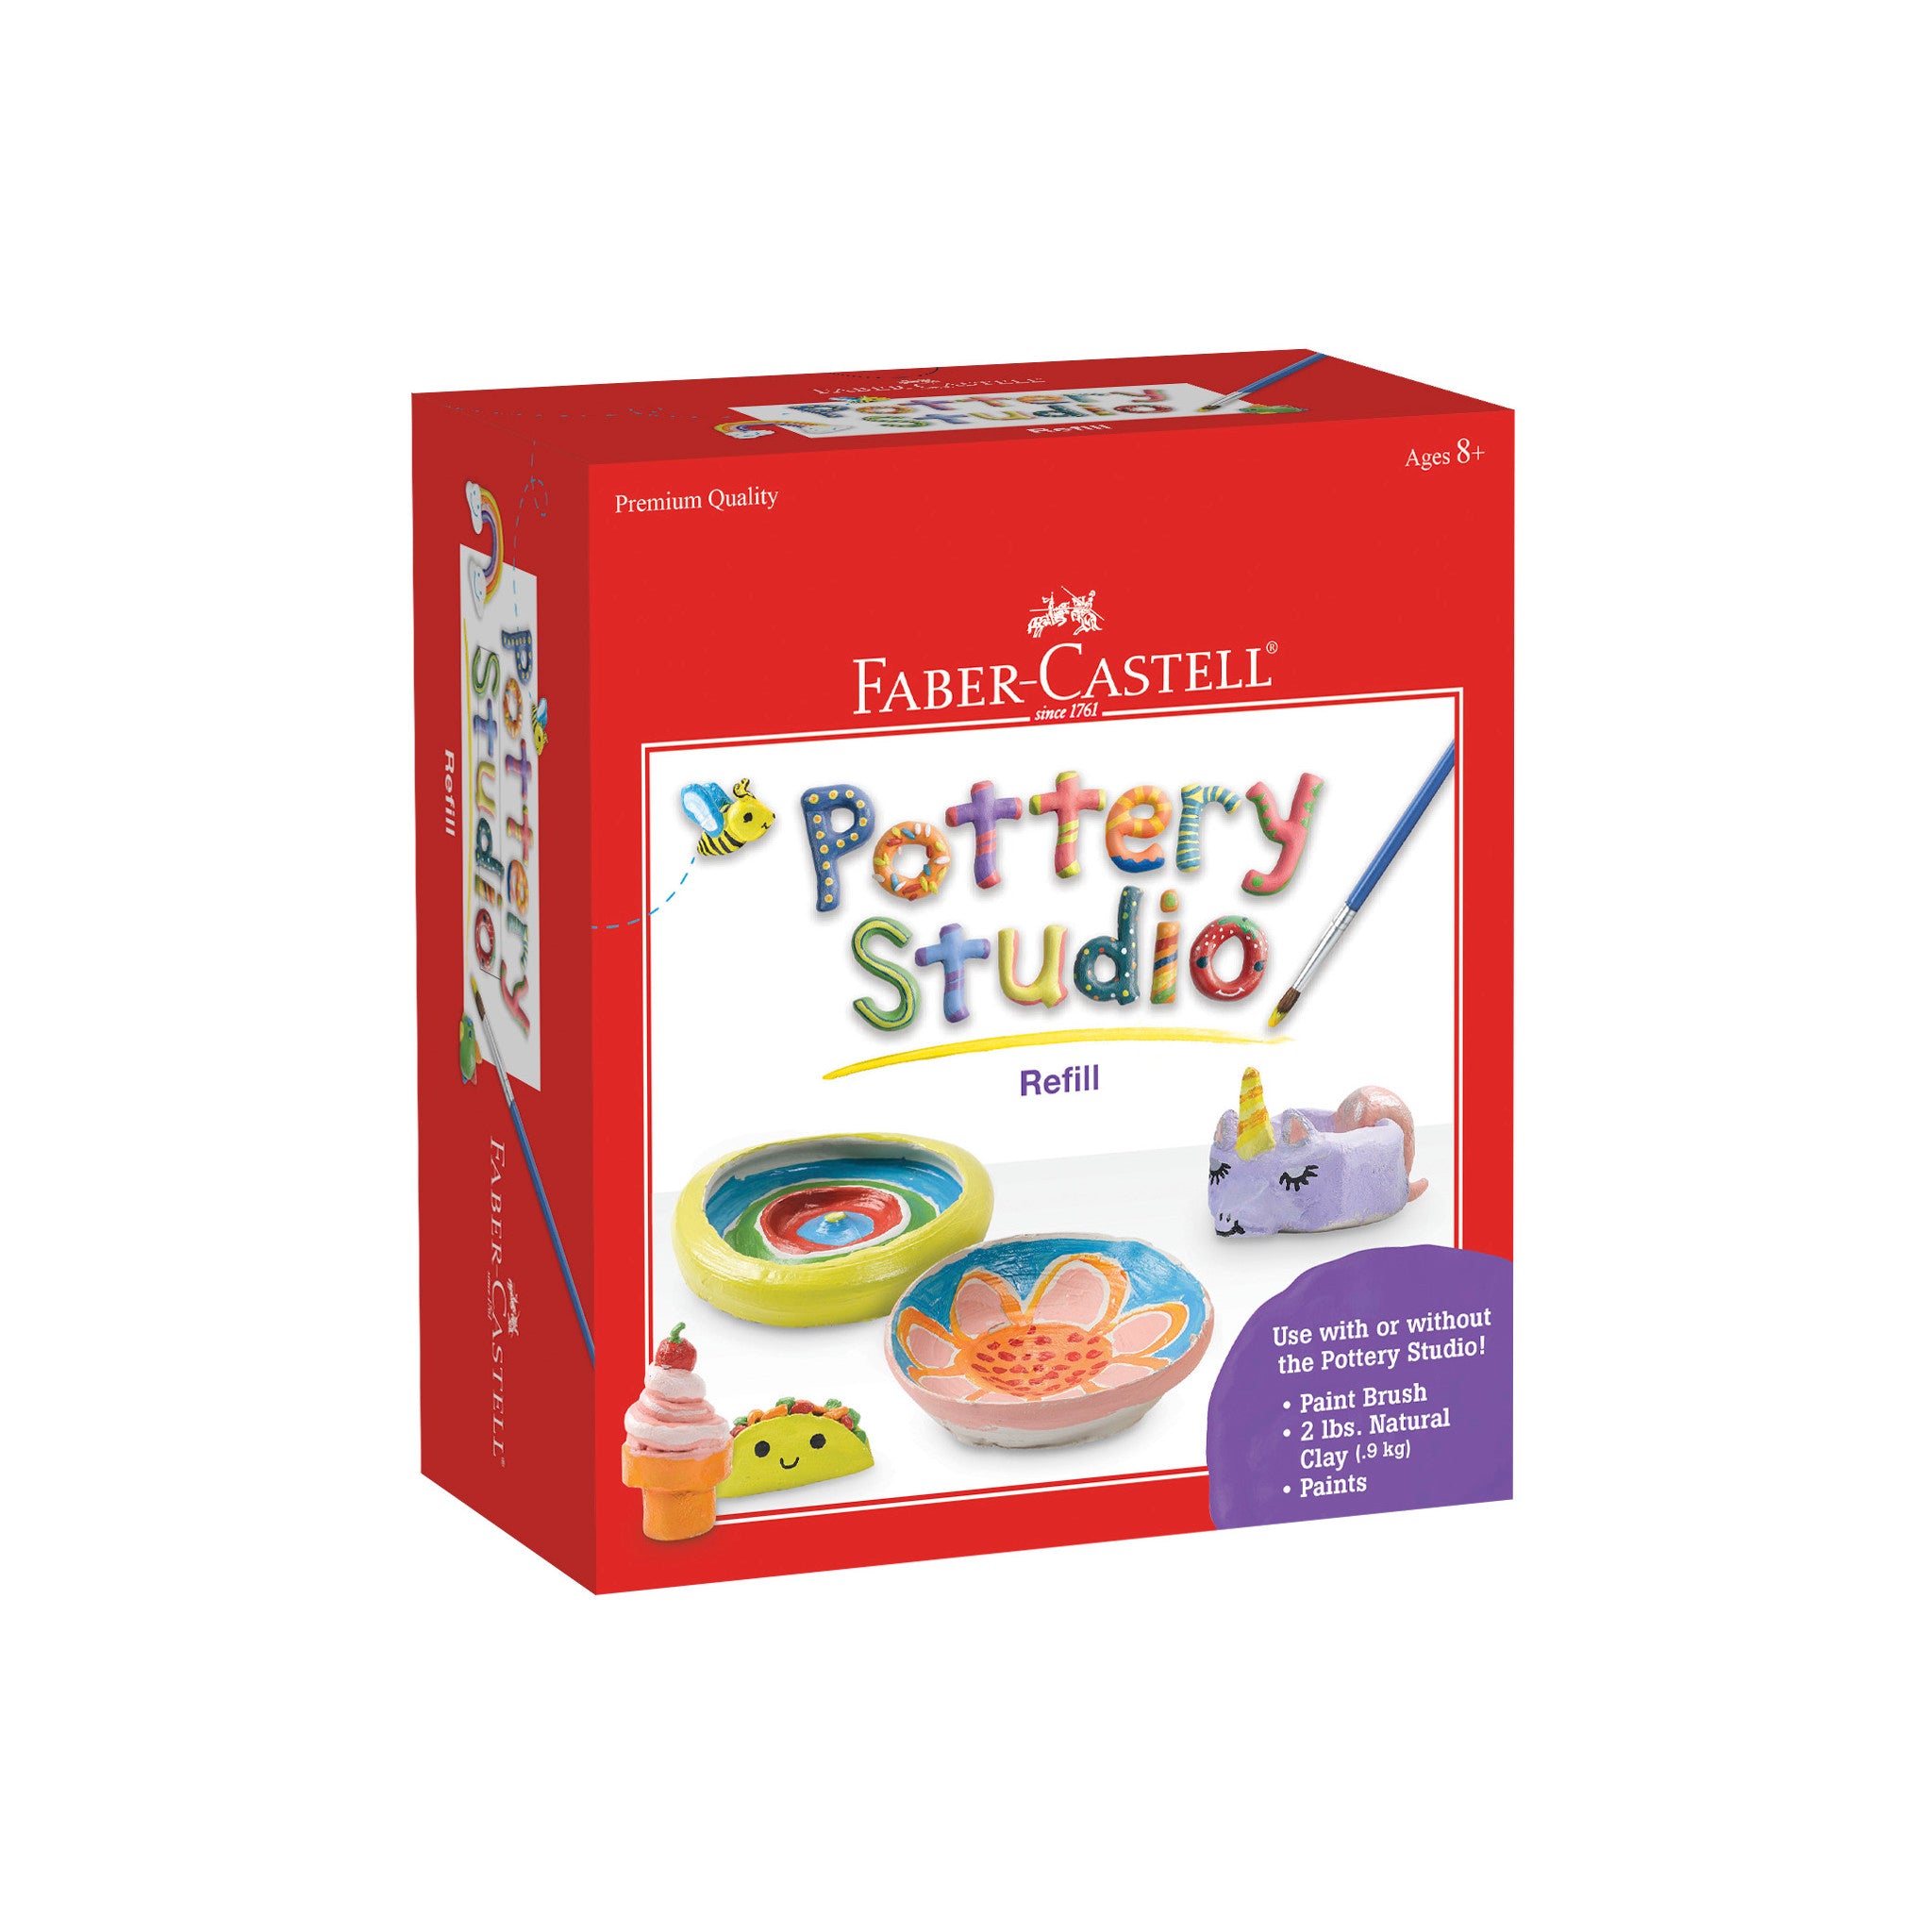 Faber-Castell Pottery Studio - Kids Pottery Wheel Kit for Ages 8+ Complete  Pottery Wheel and Painting Kit for Beginners 3 lbs of Sculpting Clay Blue